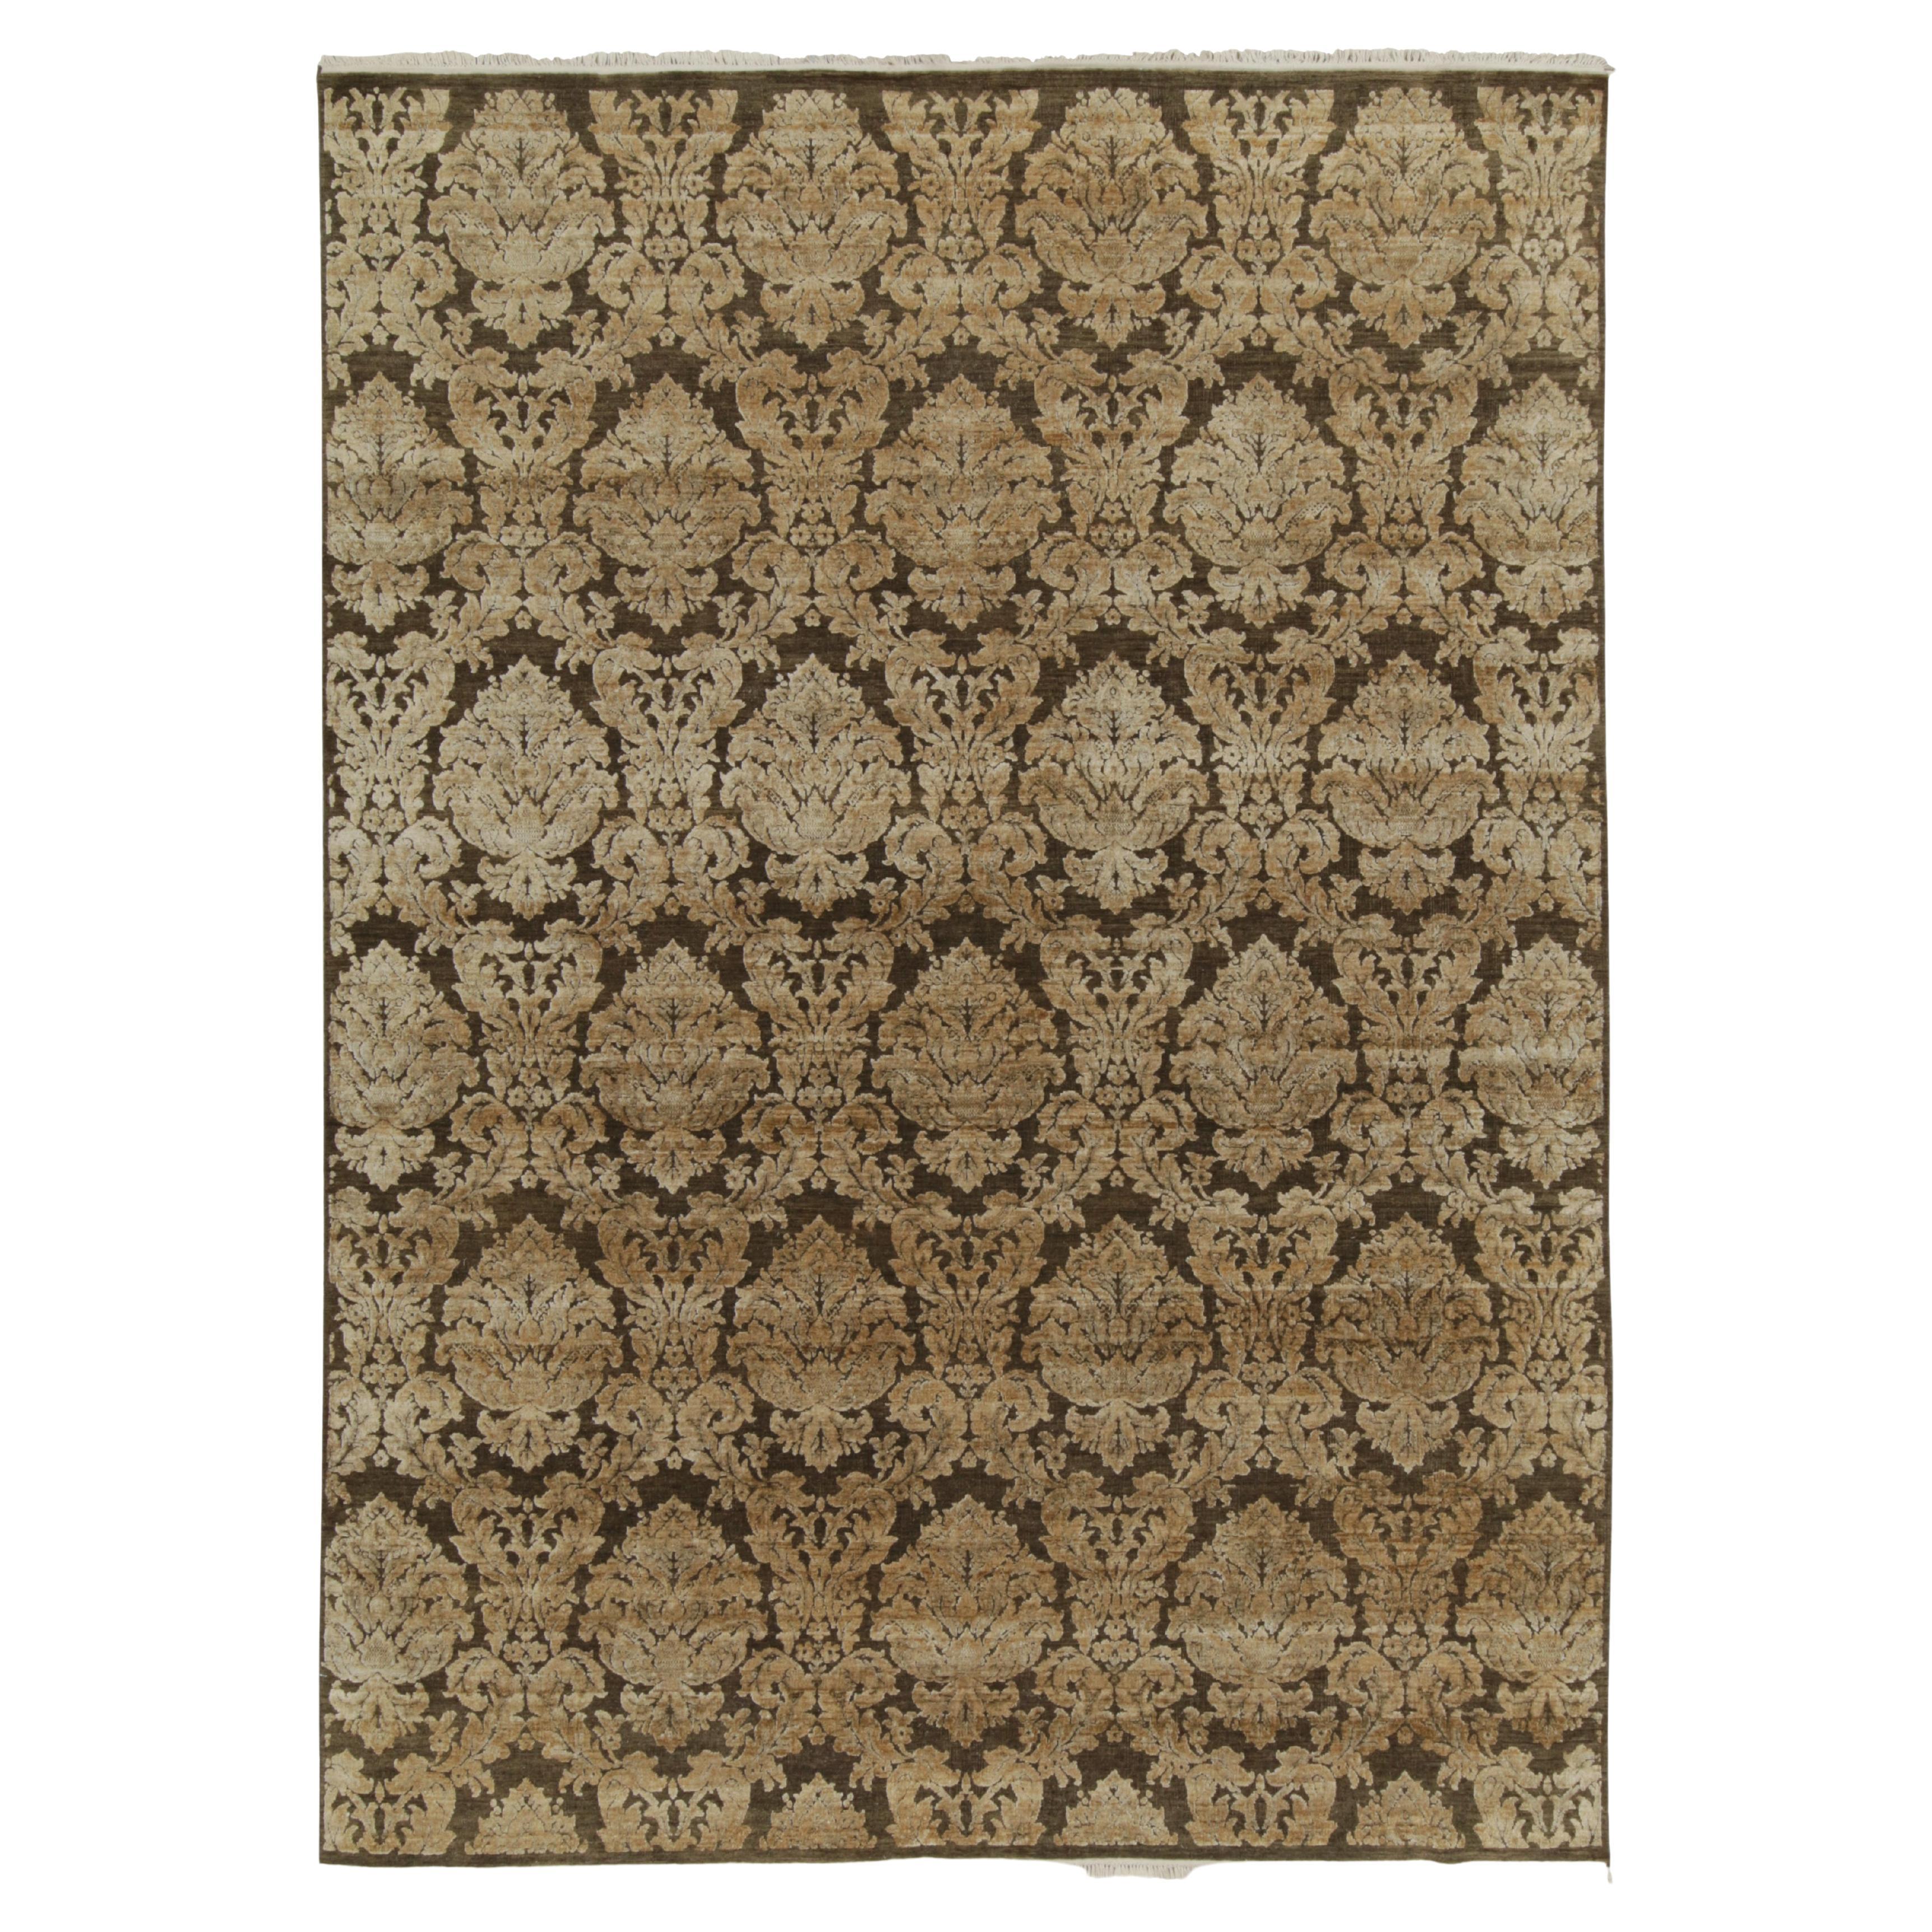 Rug & Kilim’s Classic Italian style rug in Brown with Gold Floral Patterns For Sale